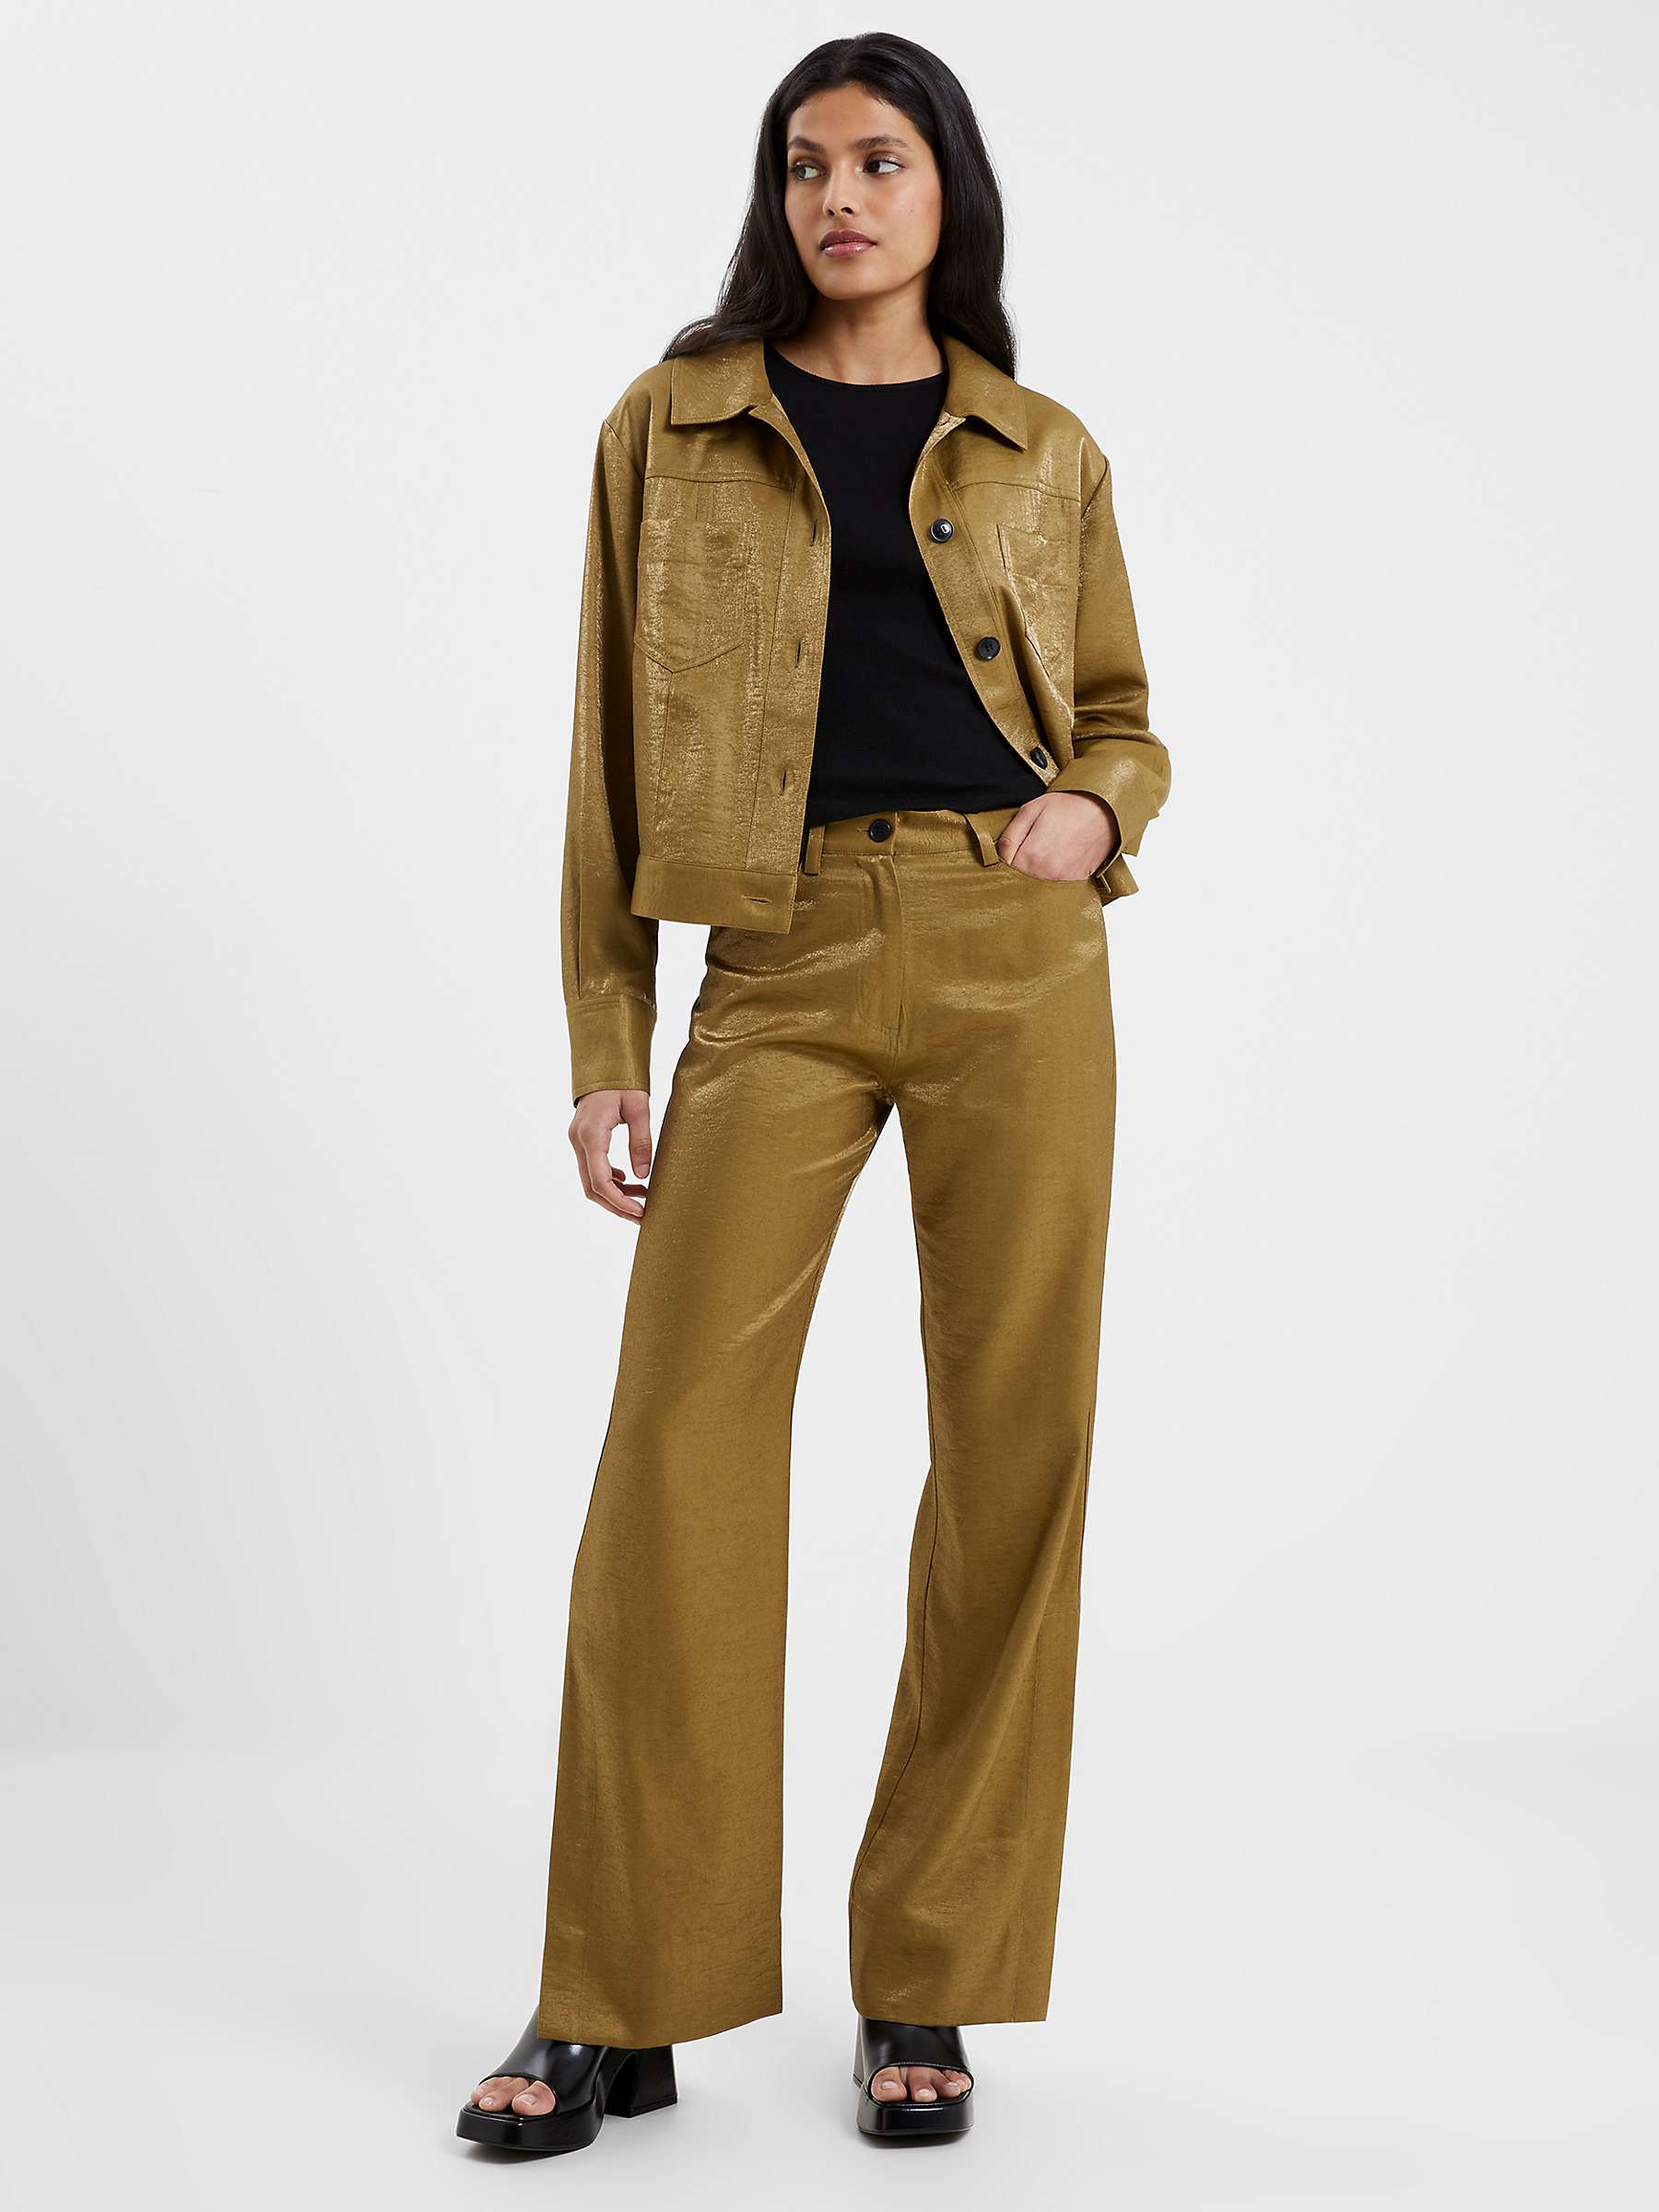 Buy French Connection Cammie Shimmer Trousers, Khaki Online at johnlewis.com